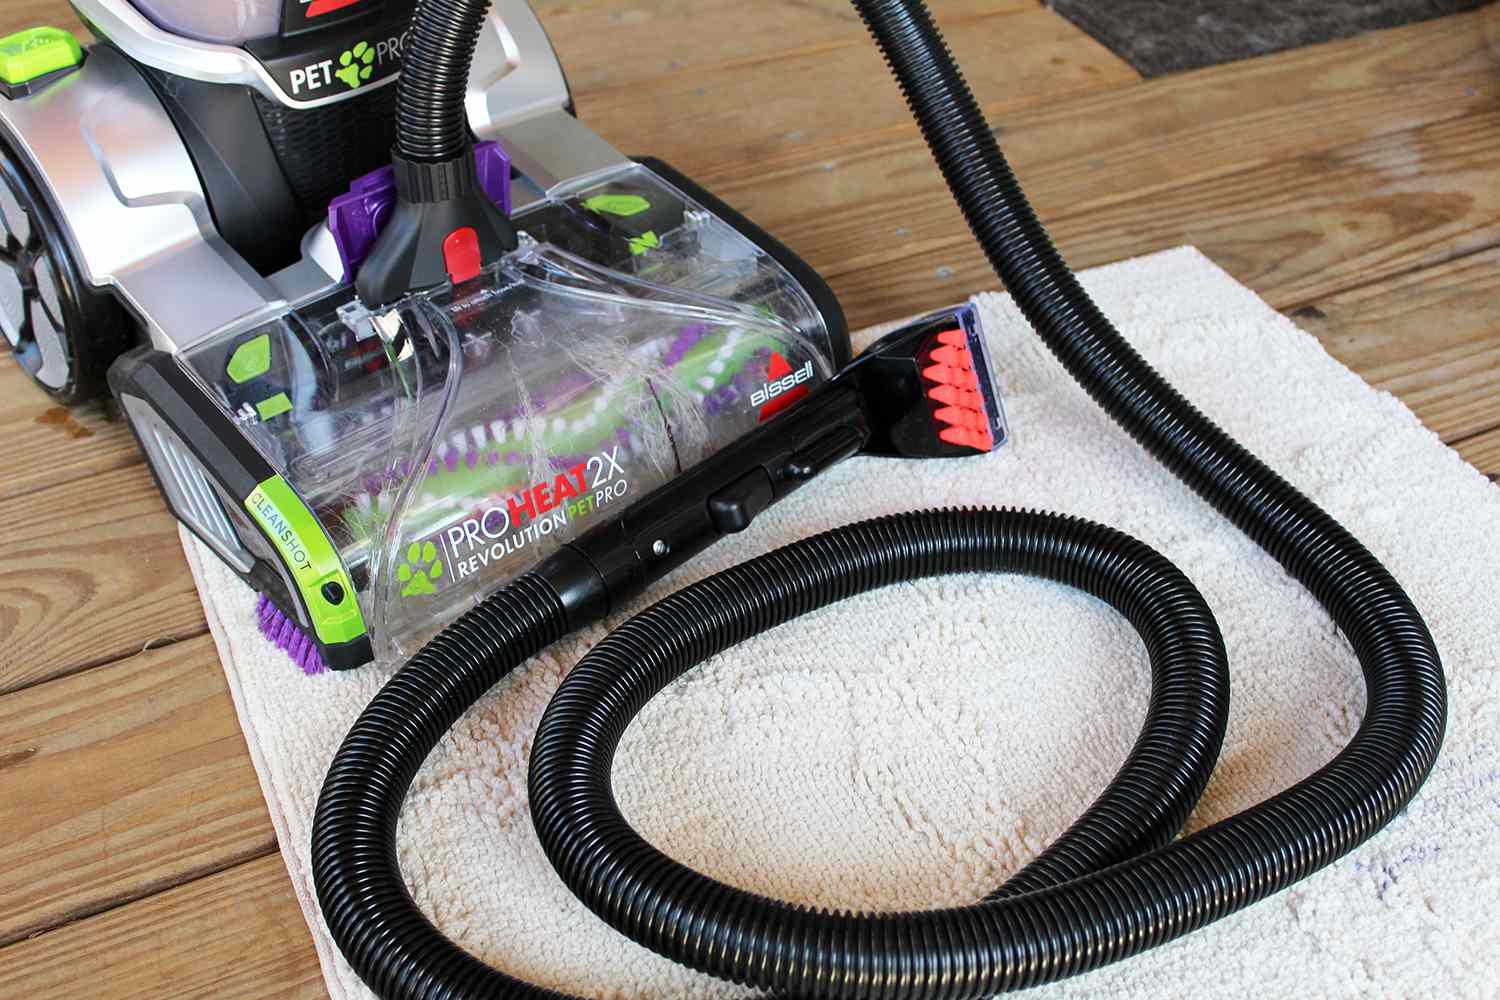 How To Use A Bissell Pet Pro Carpet Cleaner